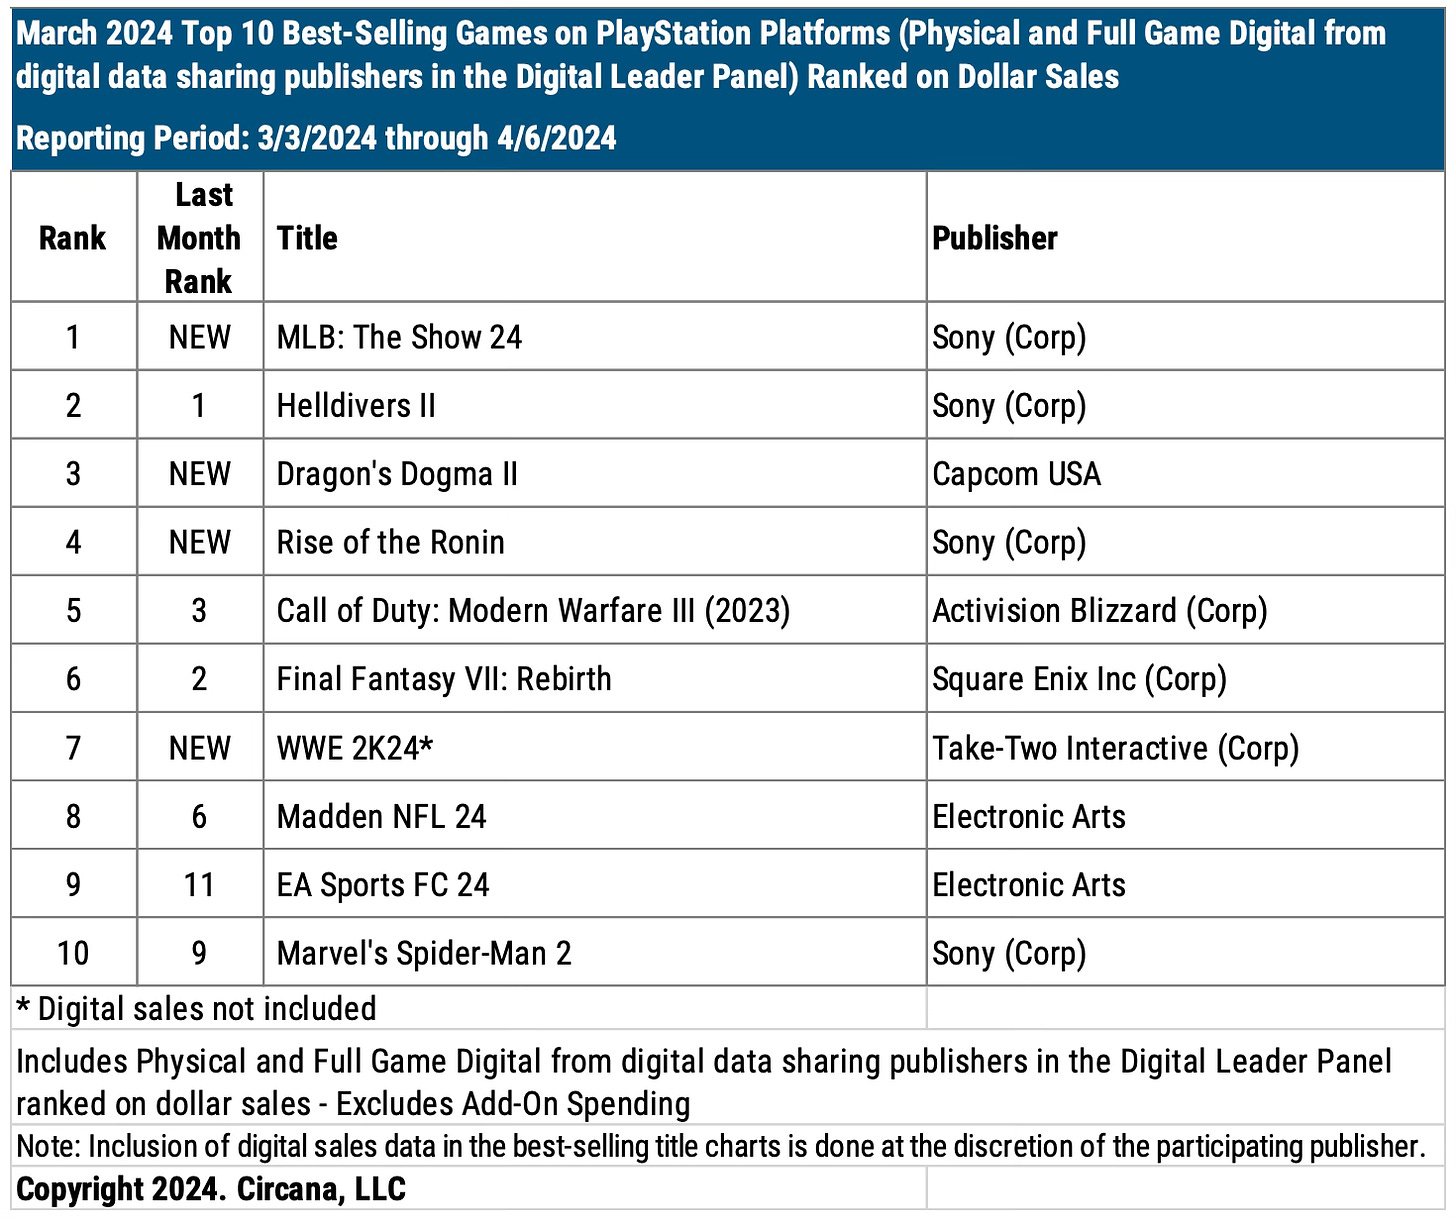 Chart showing the Top 10 Best-Selling Games on PlayStation Platforms in March 2024